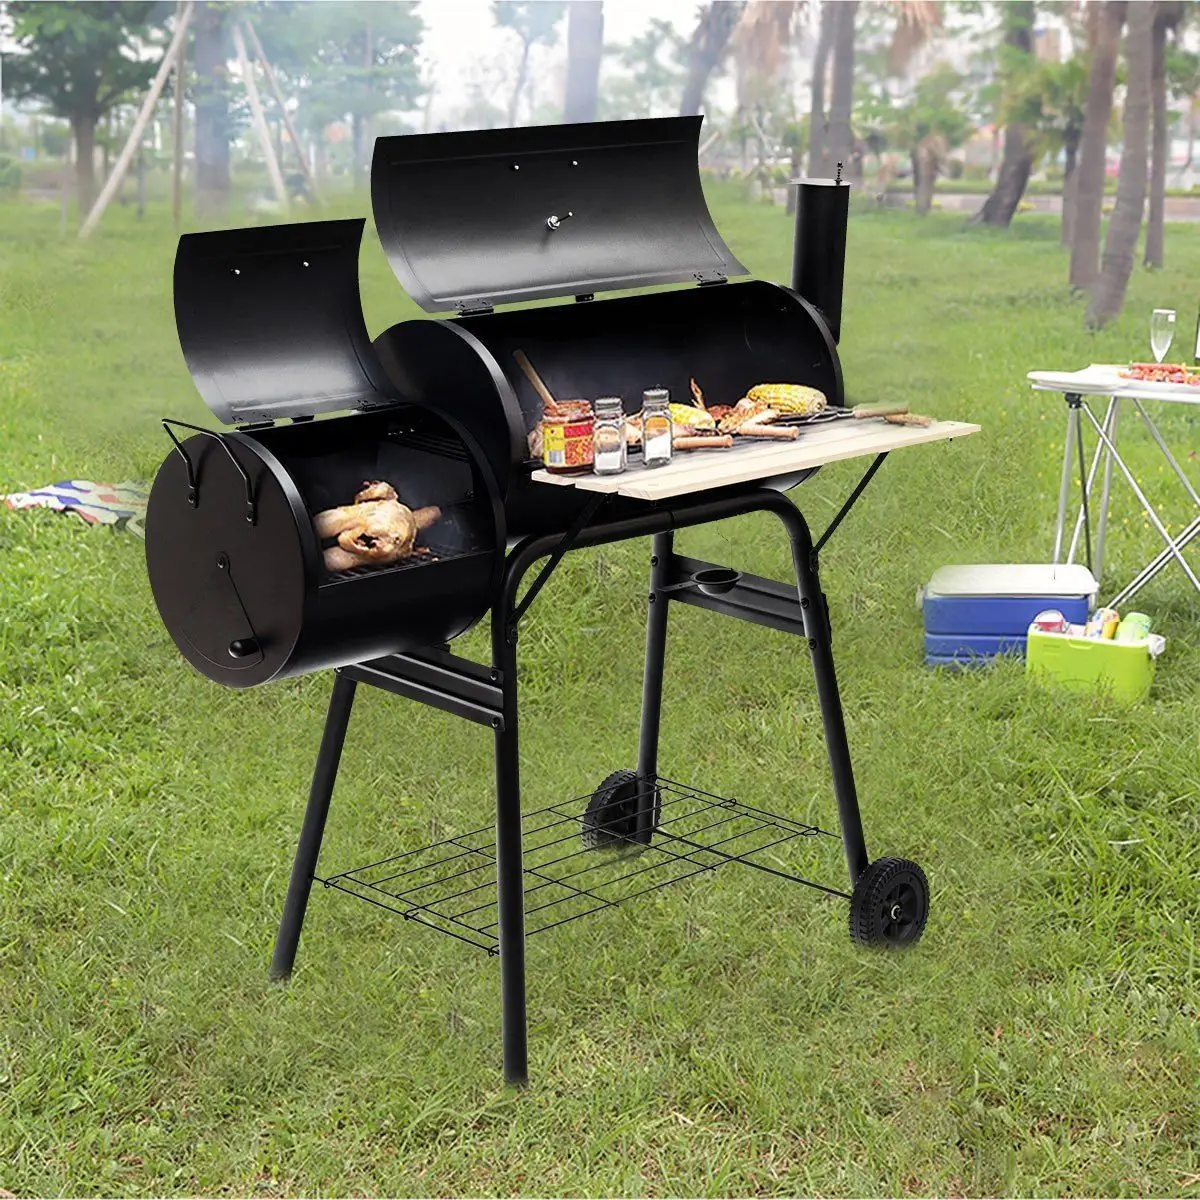 Outdoor BBQ Grill Barbecue Pit Patio Cooker Black ...